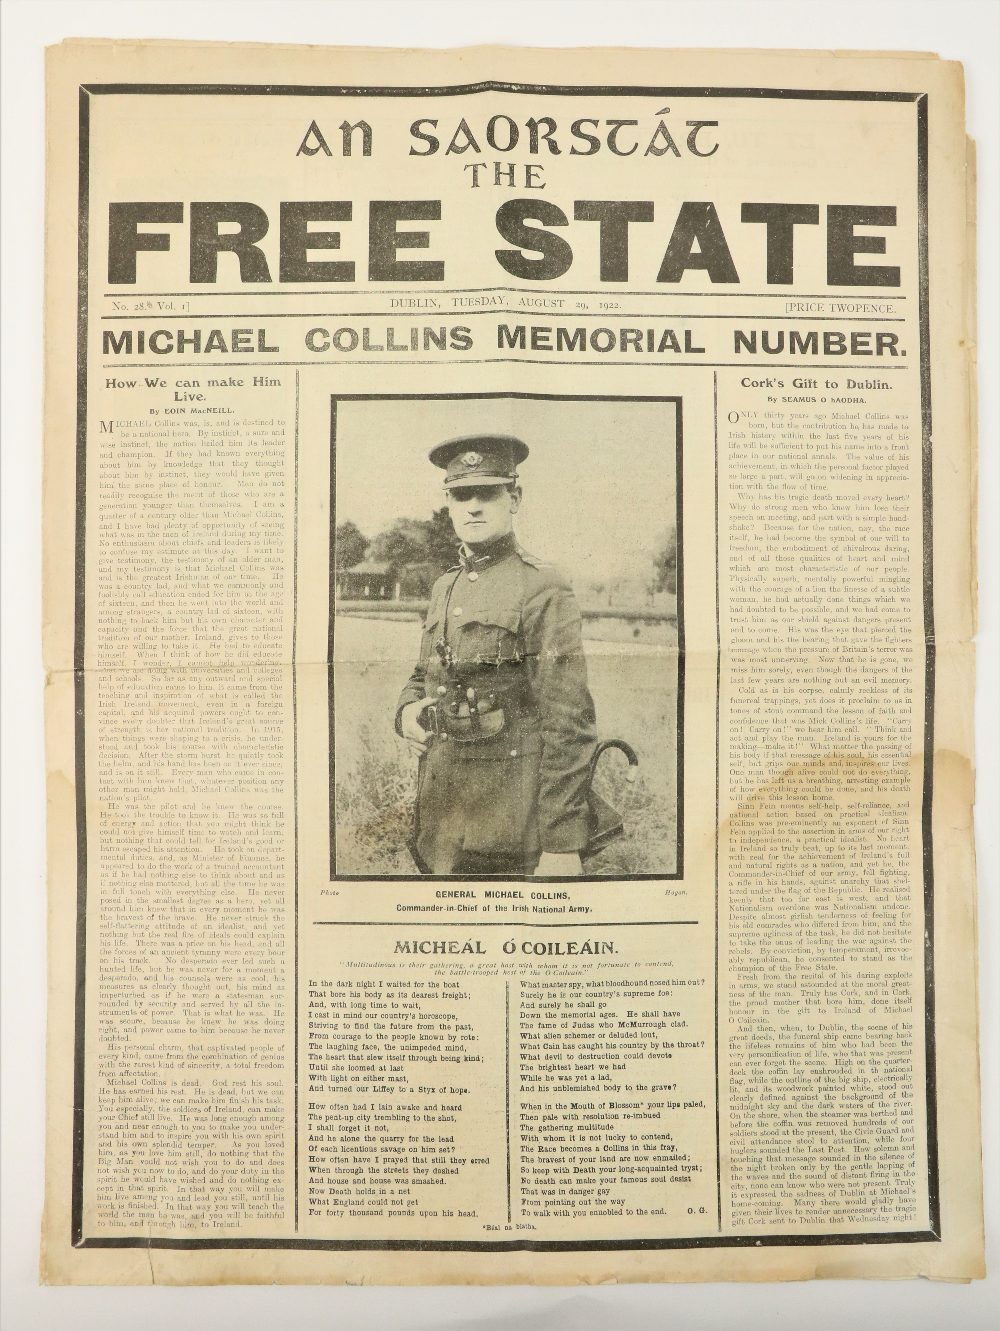 [Collins (Michael)] An Saorstat - The Free State, No. 28, Vol. I Dublin, Tuesday August 29, 1922,